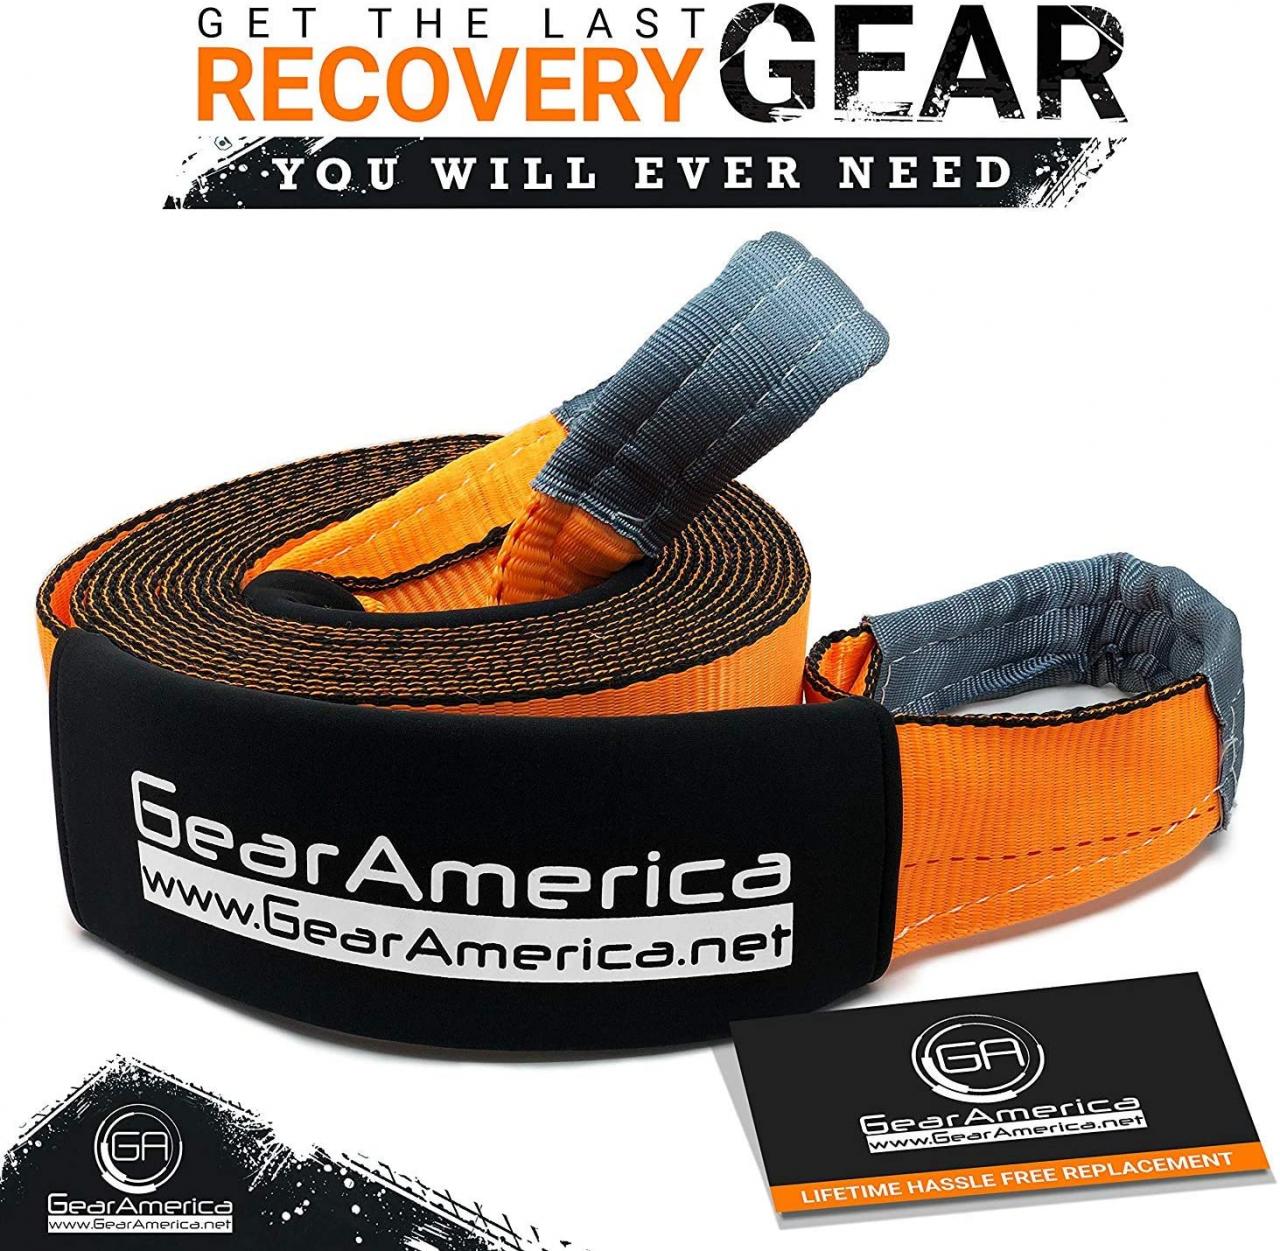 Buy GearAmerica Recovery Tow Straps 4 x 30' | Ultra Heavy Duty 45,000 lbs  (22.5 US Tons) Strength | Use for Emergency 4x4 Towing or Recovery | Triple  Reinforced Loops, Protective Sleeves, Bag Online in Vietnam. B078K25FLM